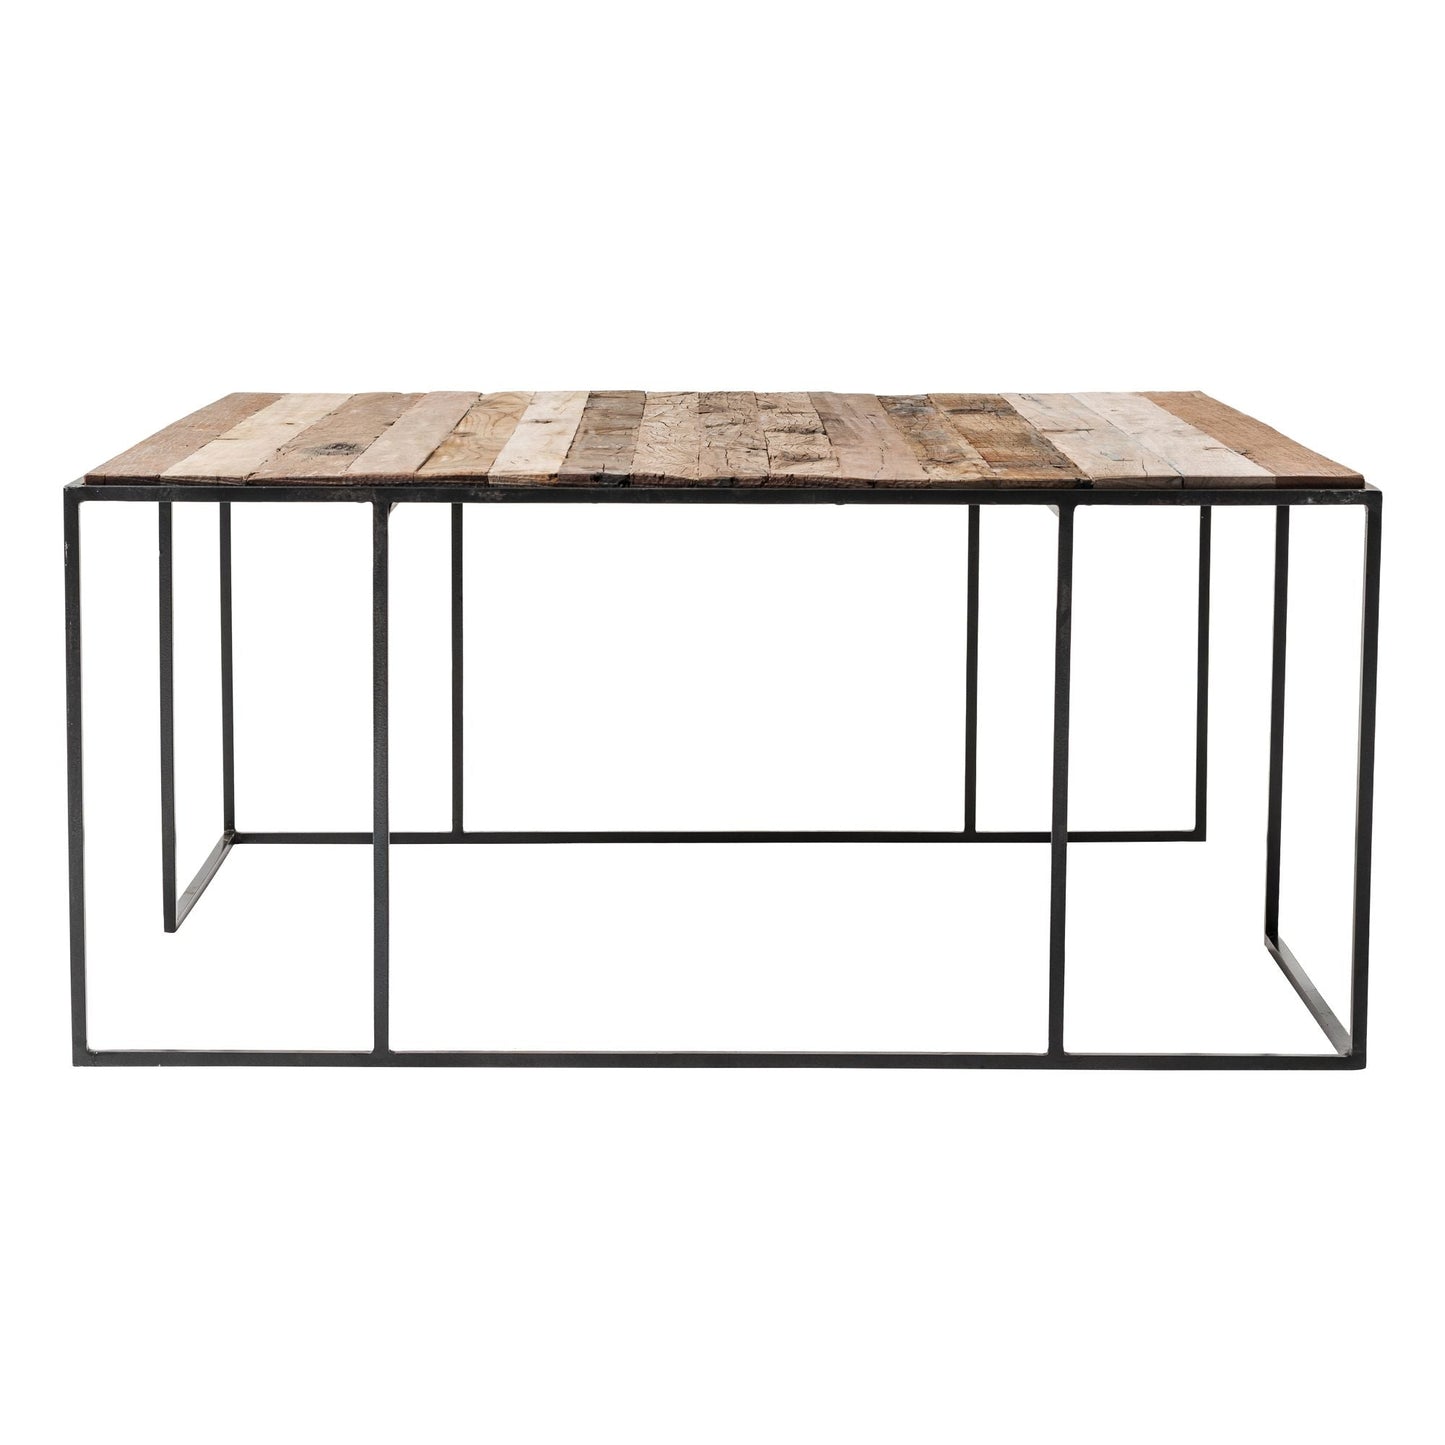 NovaSolo Rustika 39" Black Rustic Boat Wood Coffee Table With 2 Nested Side Tables